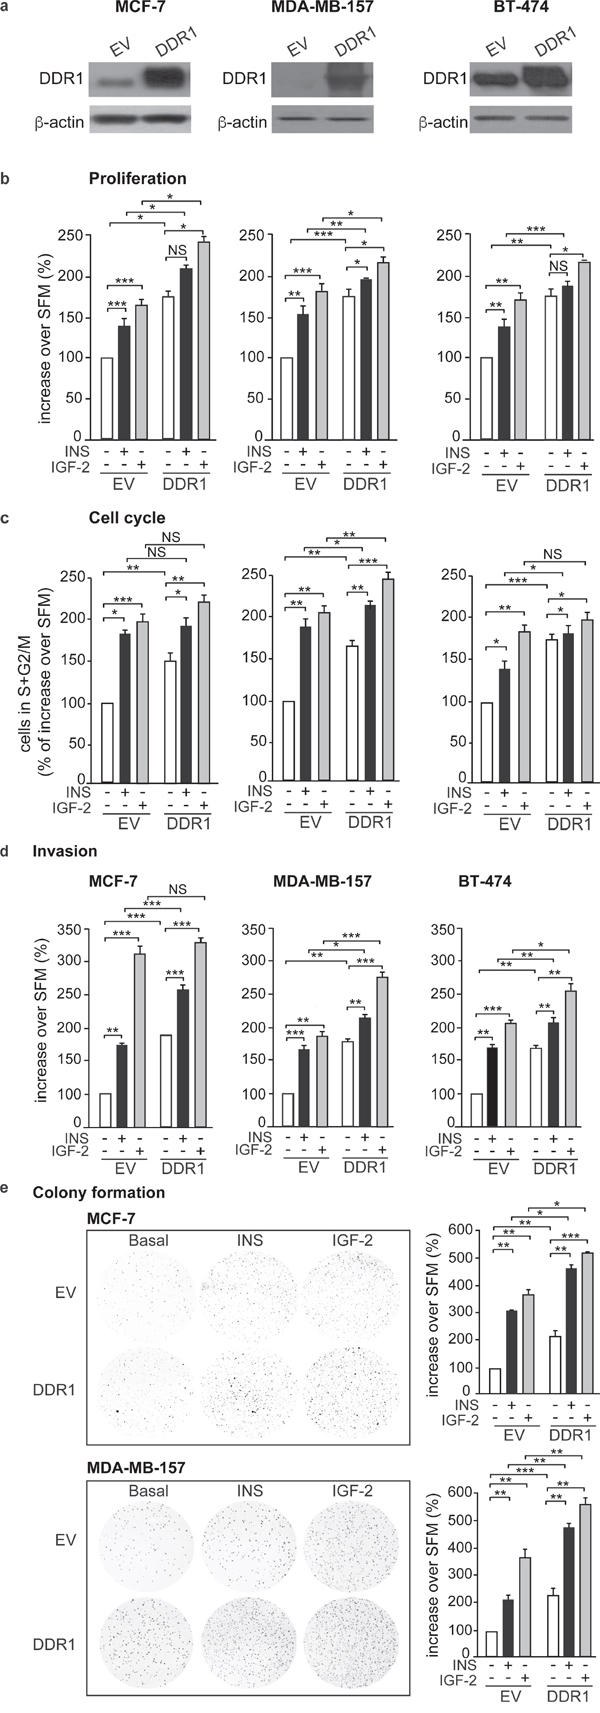 DDR1 overexpression affects insulin and IGF-2 mediated biological effects in human cancer cells.